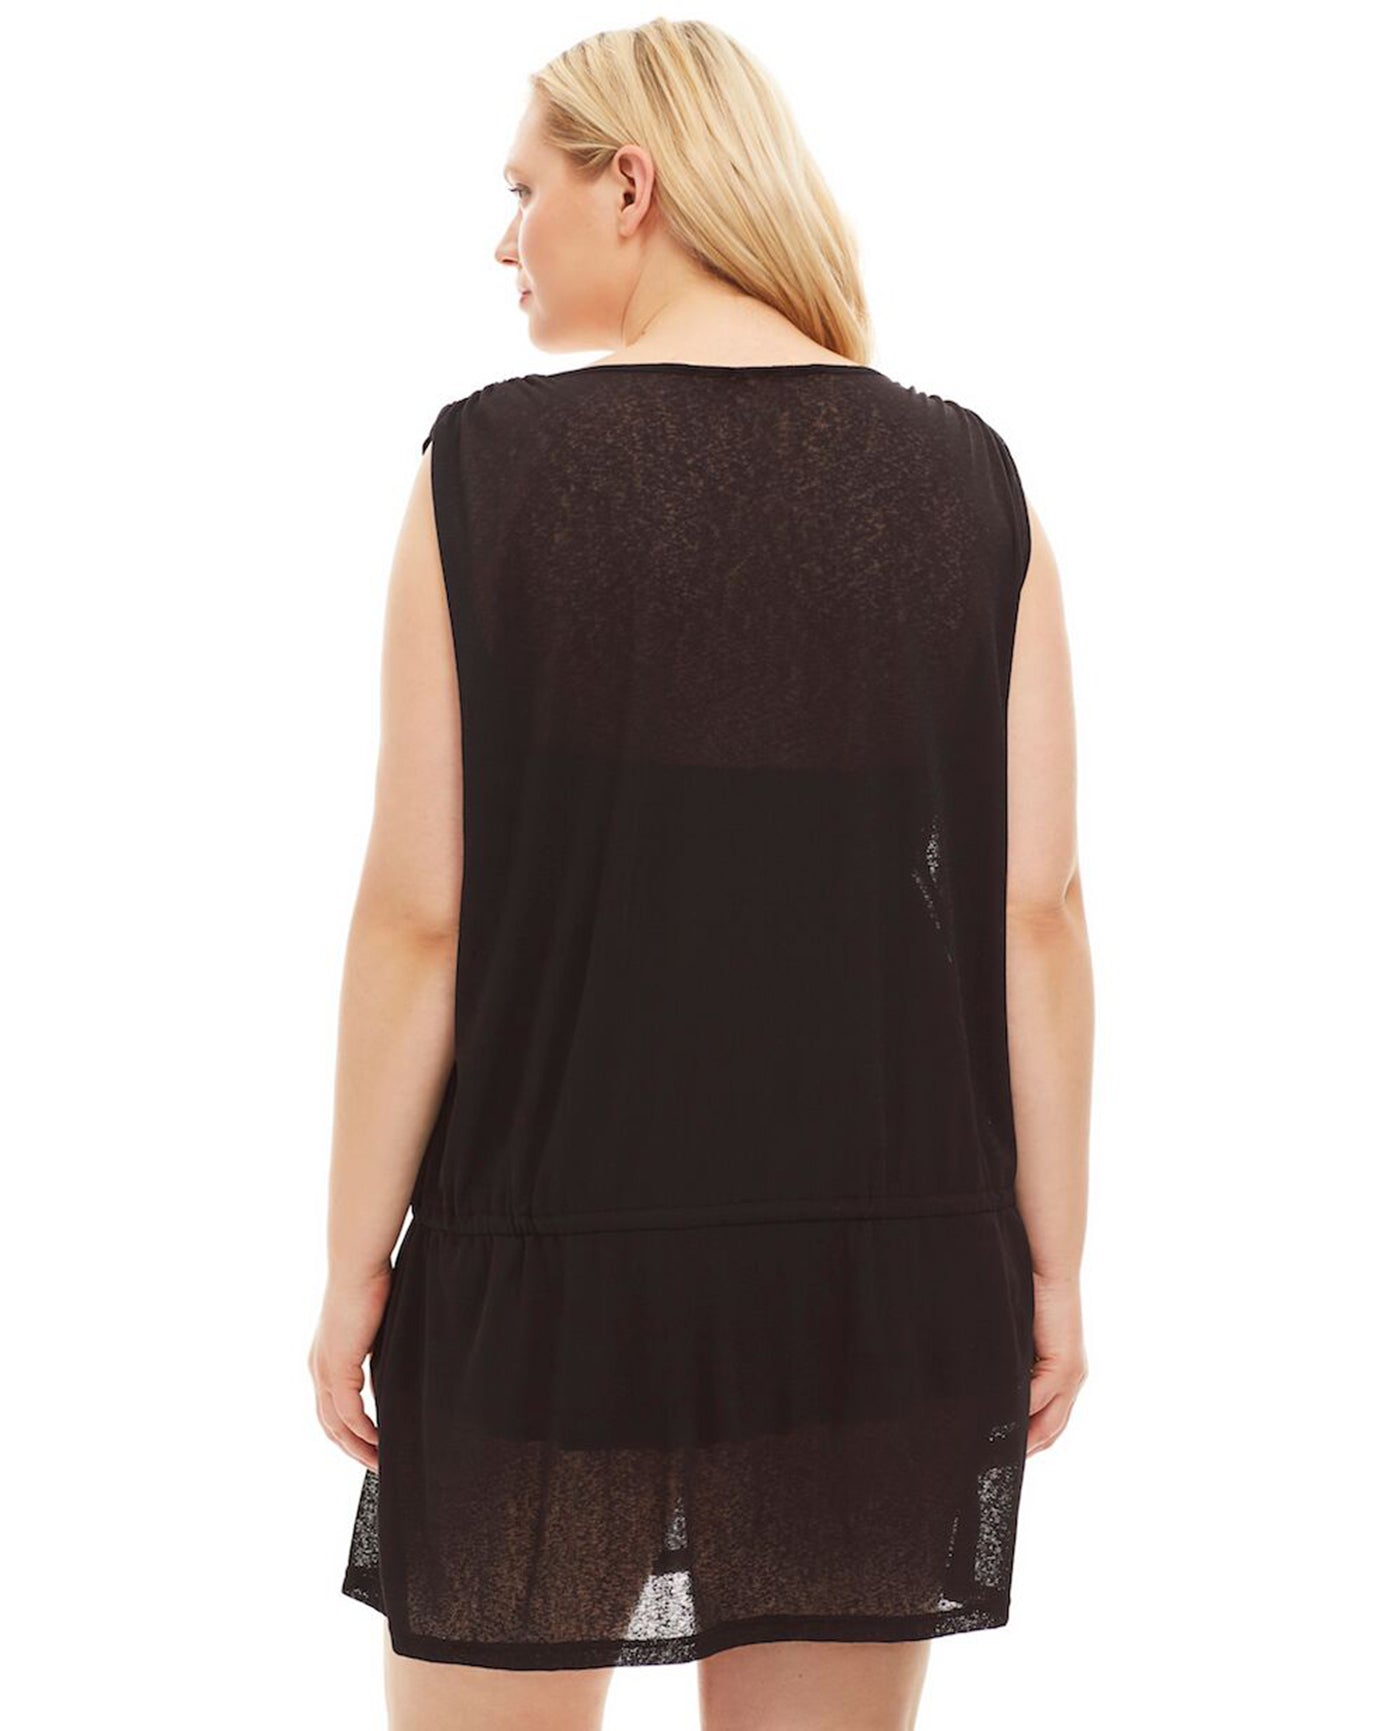 Back View Of Always For Me Plus Size Drawstring Tank Cover Up Dress | AFM BLACK